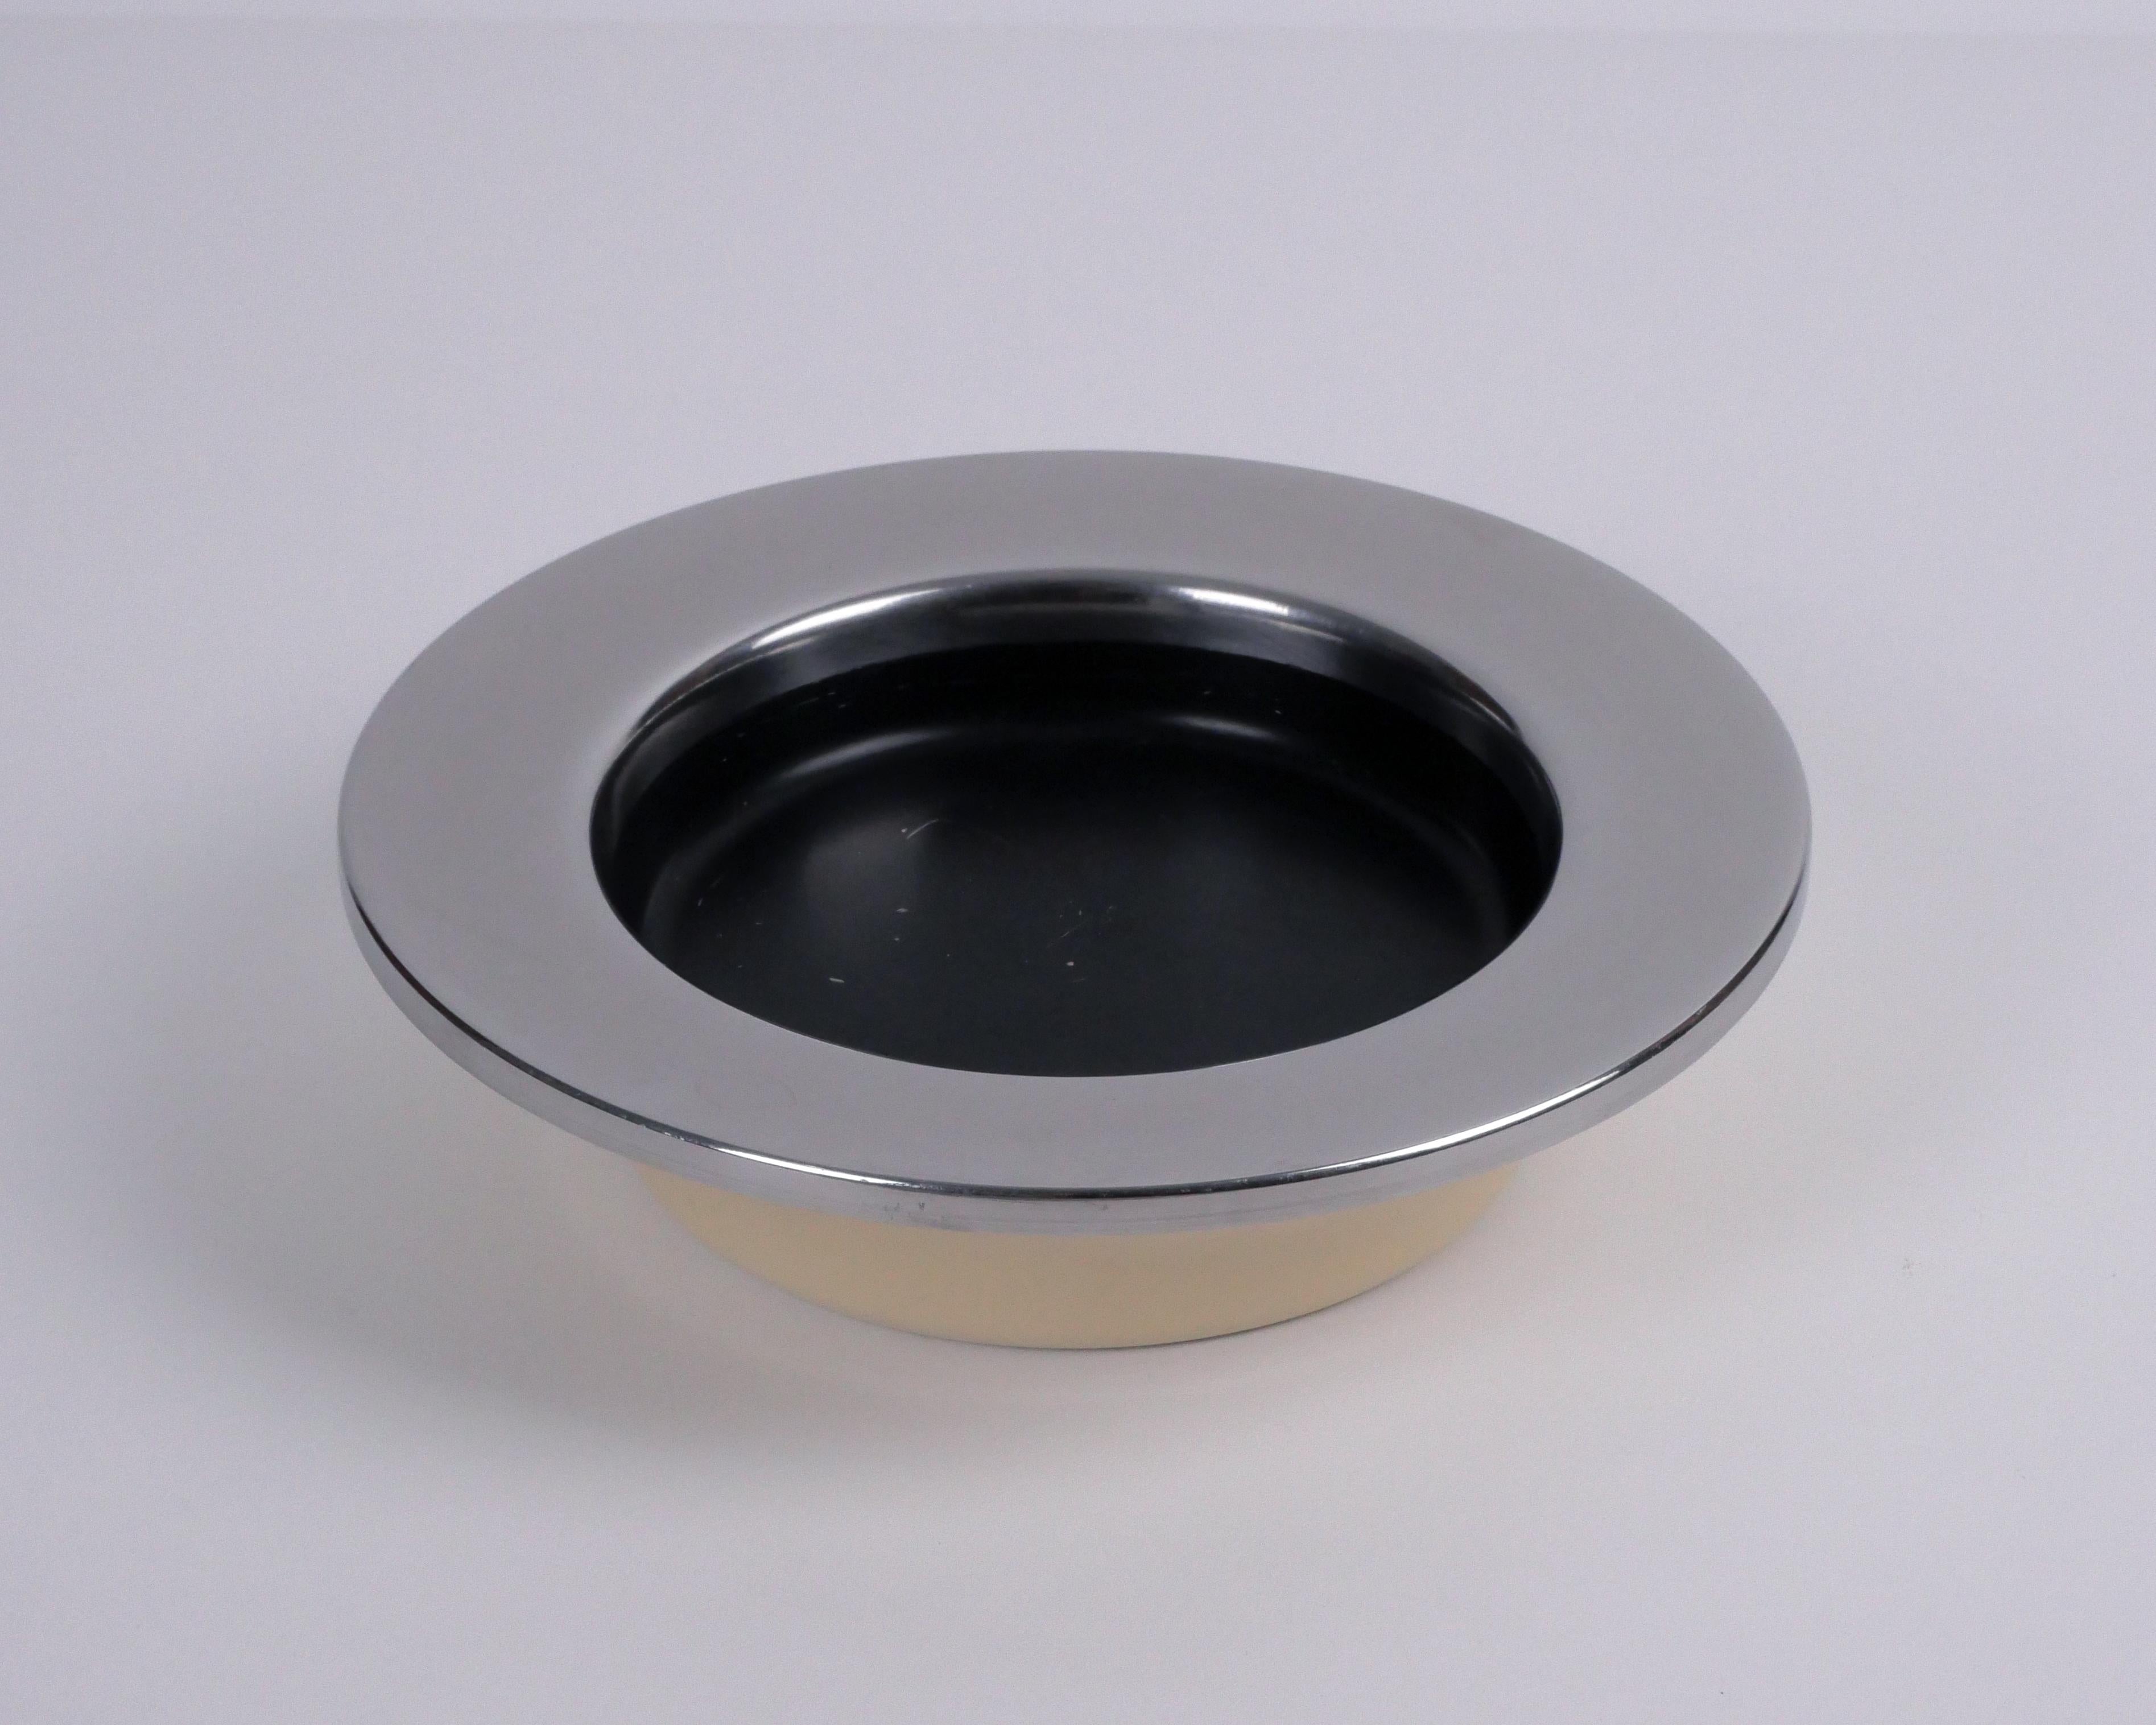 Gino Colombini for Kartell, c. 1968
Ashtray / dish

ABS plastic with chrome and black painted metal insert
Good condition, with some light scratches to the black paint.

Designer’s/Maker’s stamp to underside (note spelling mistake Colombino